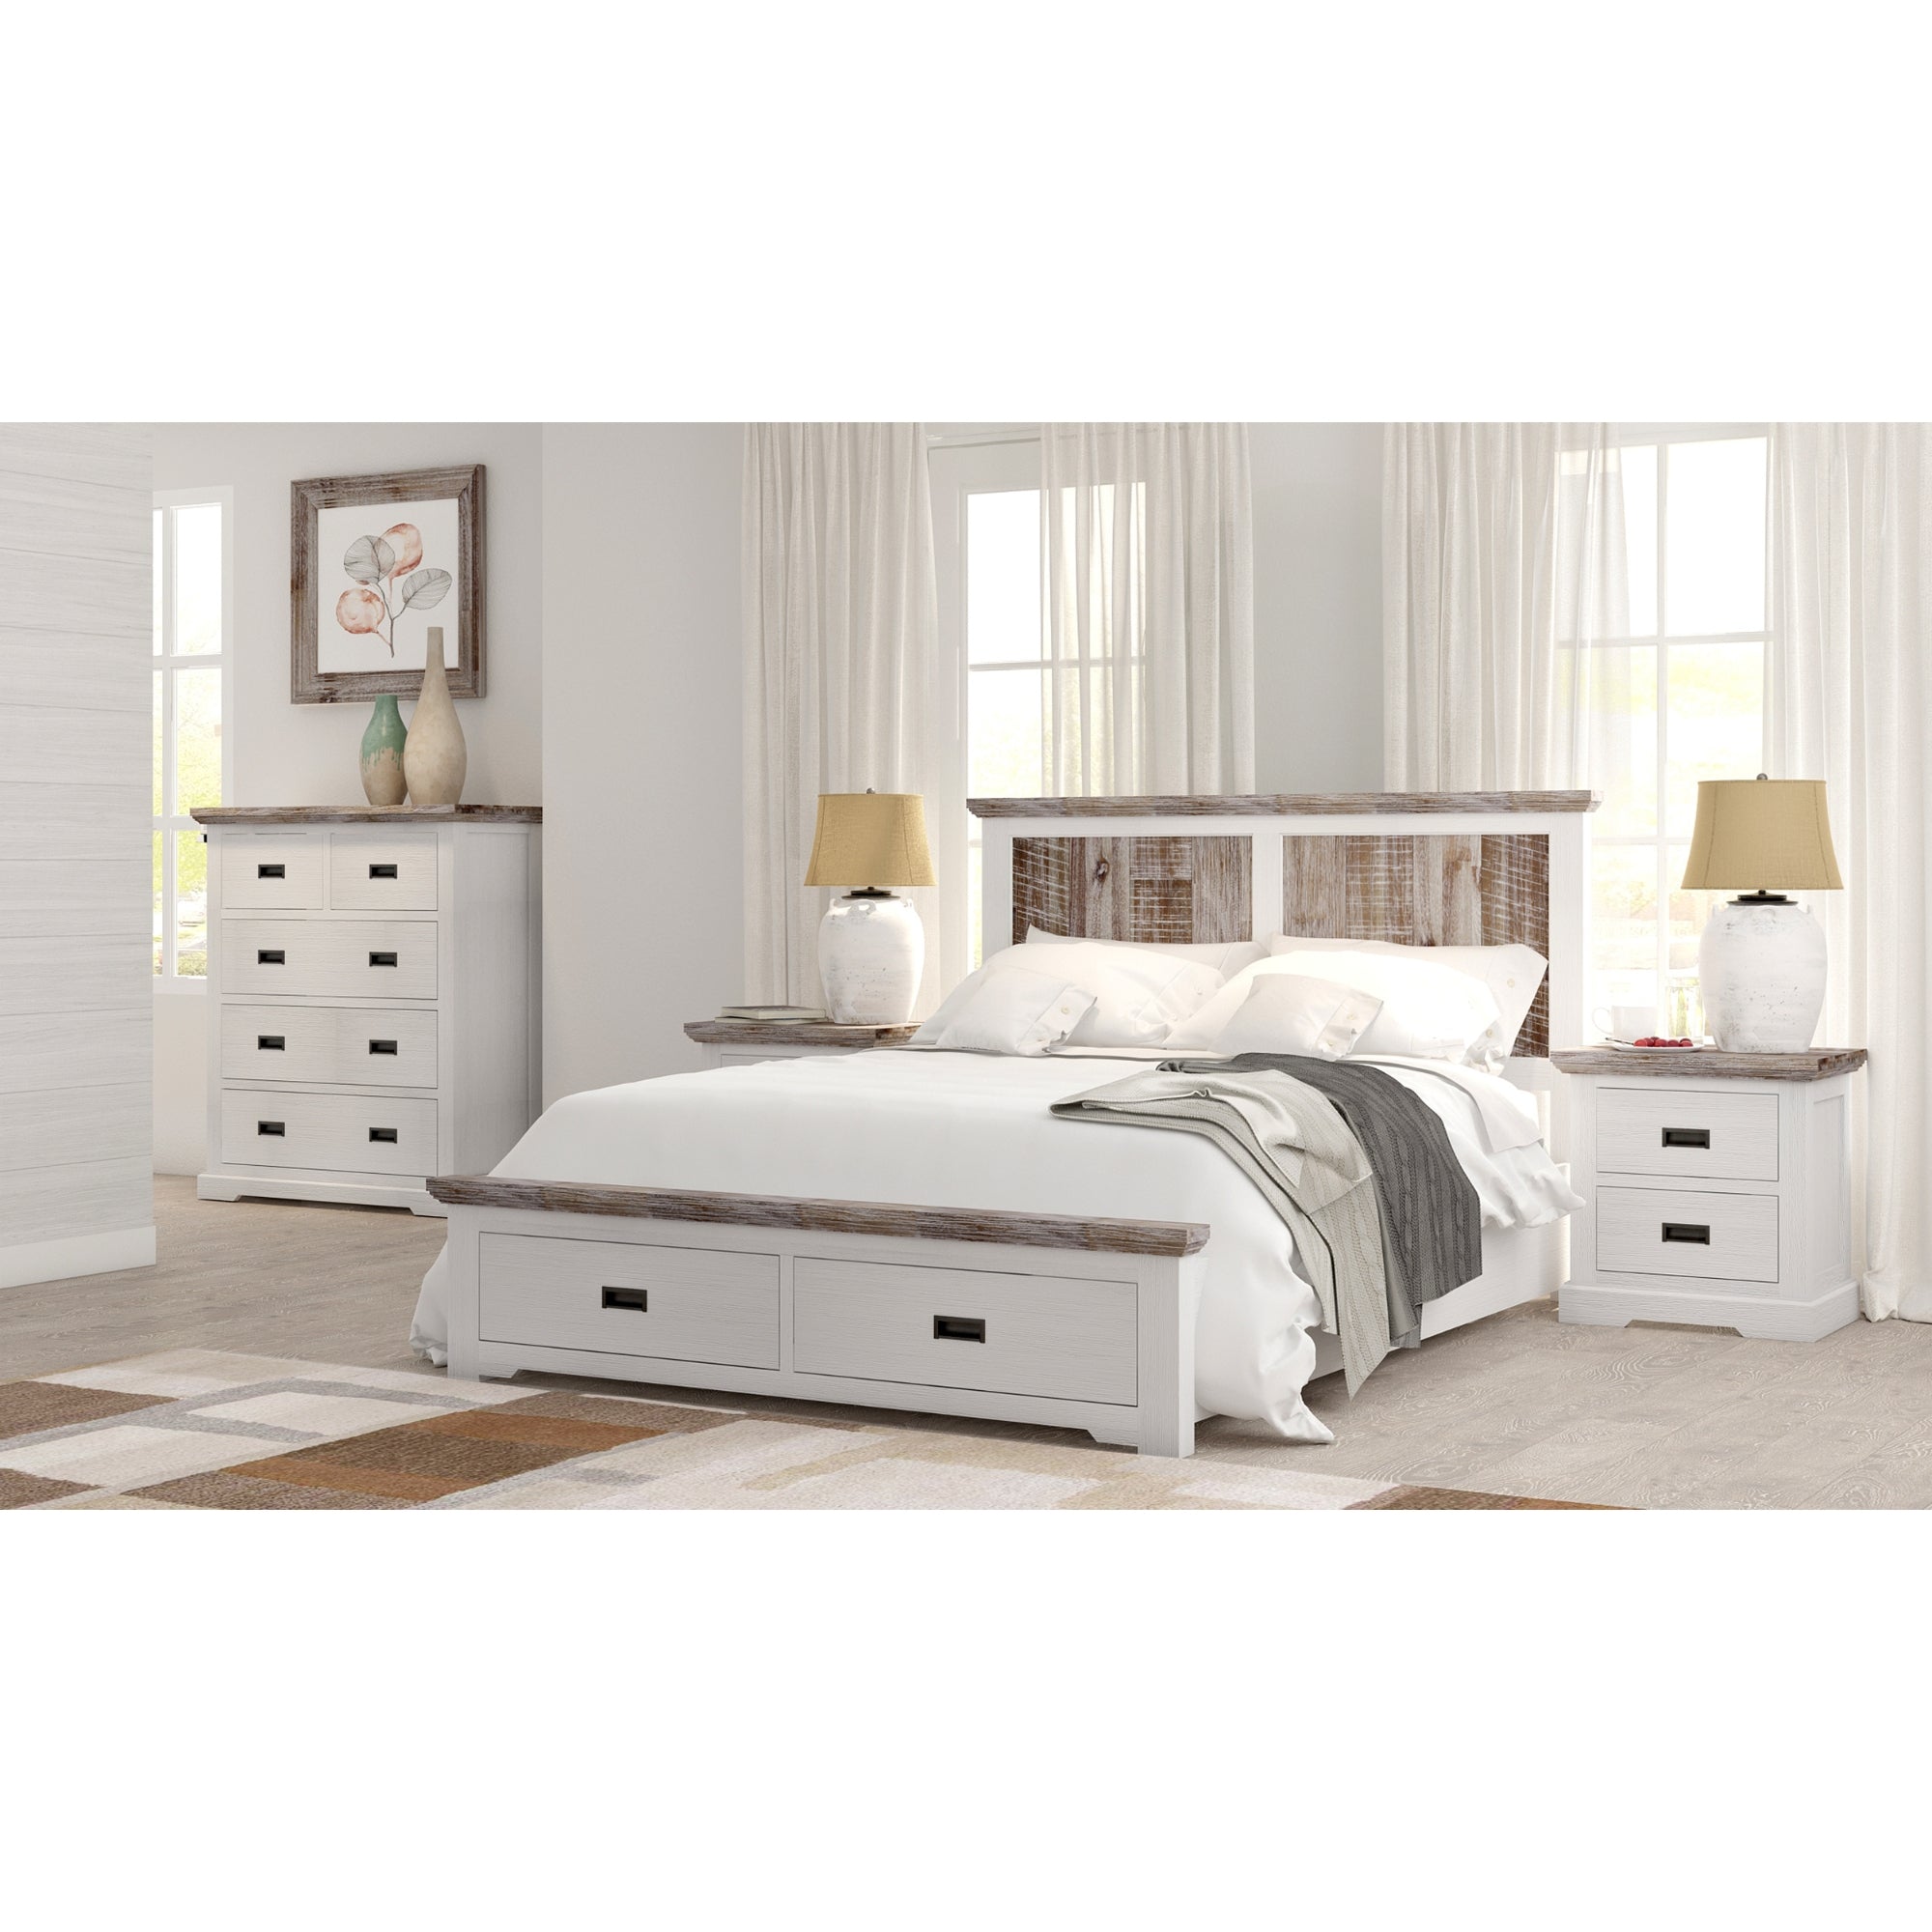 Queen Bed Frame w/ Storage Drawers, Acacia Timber, Hampton Style